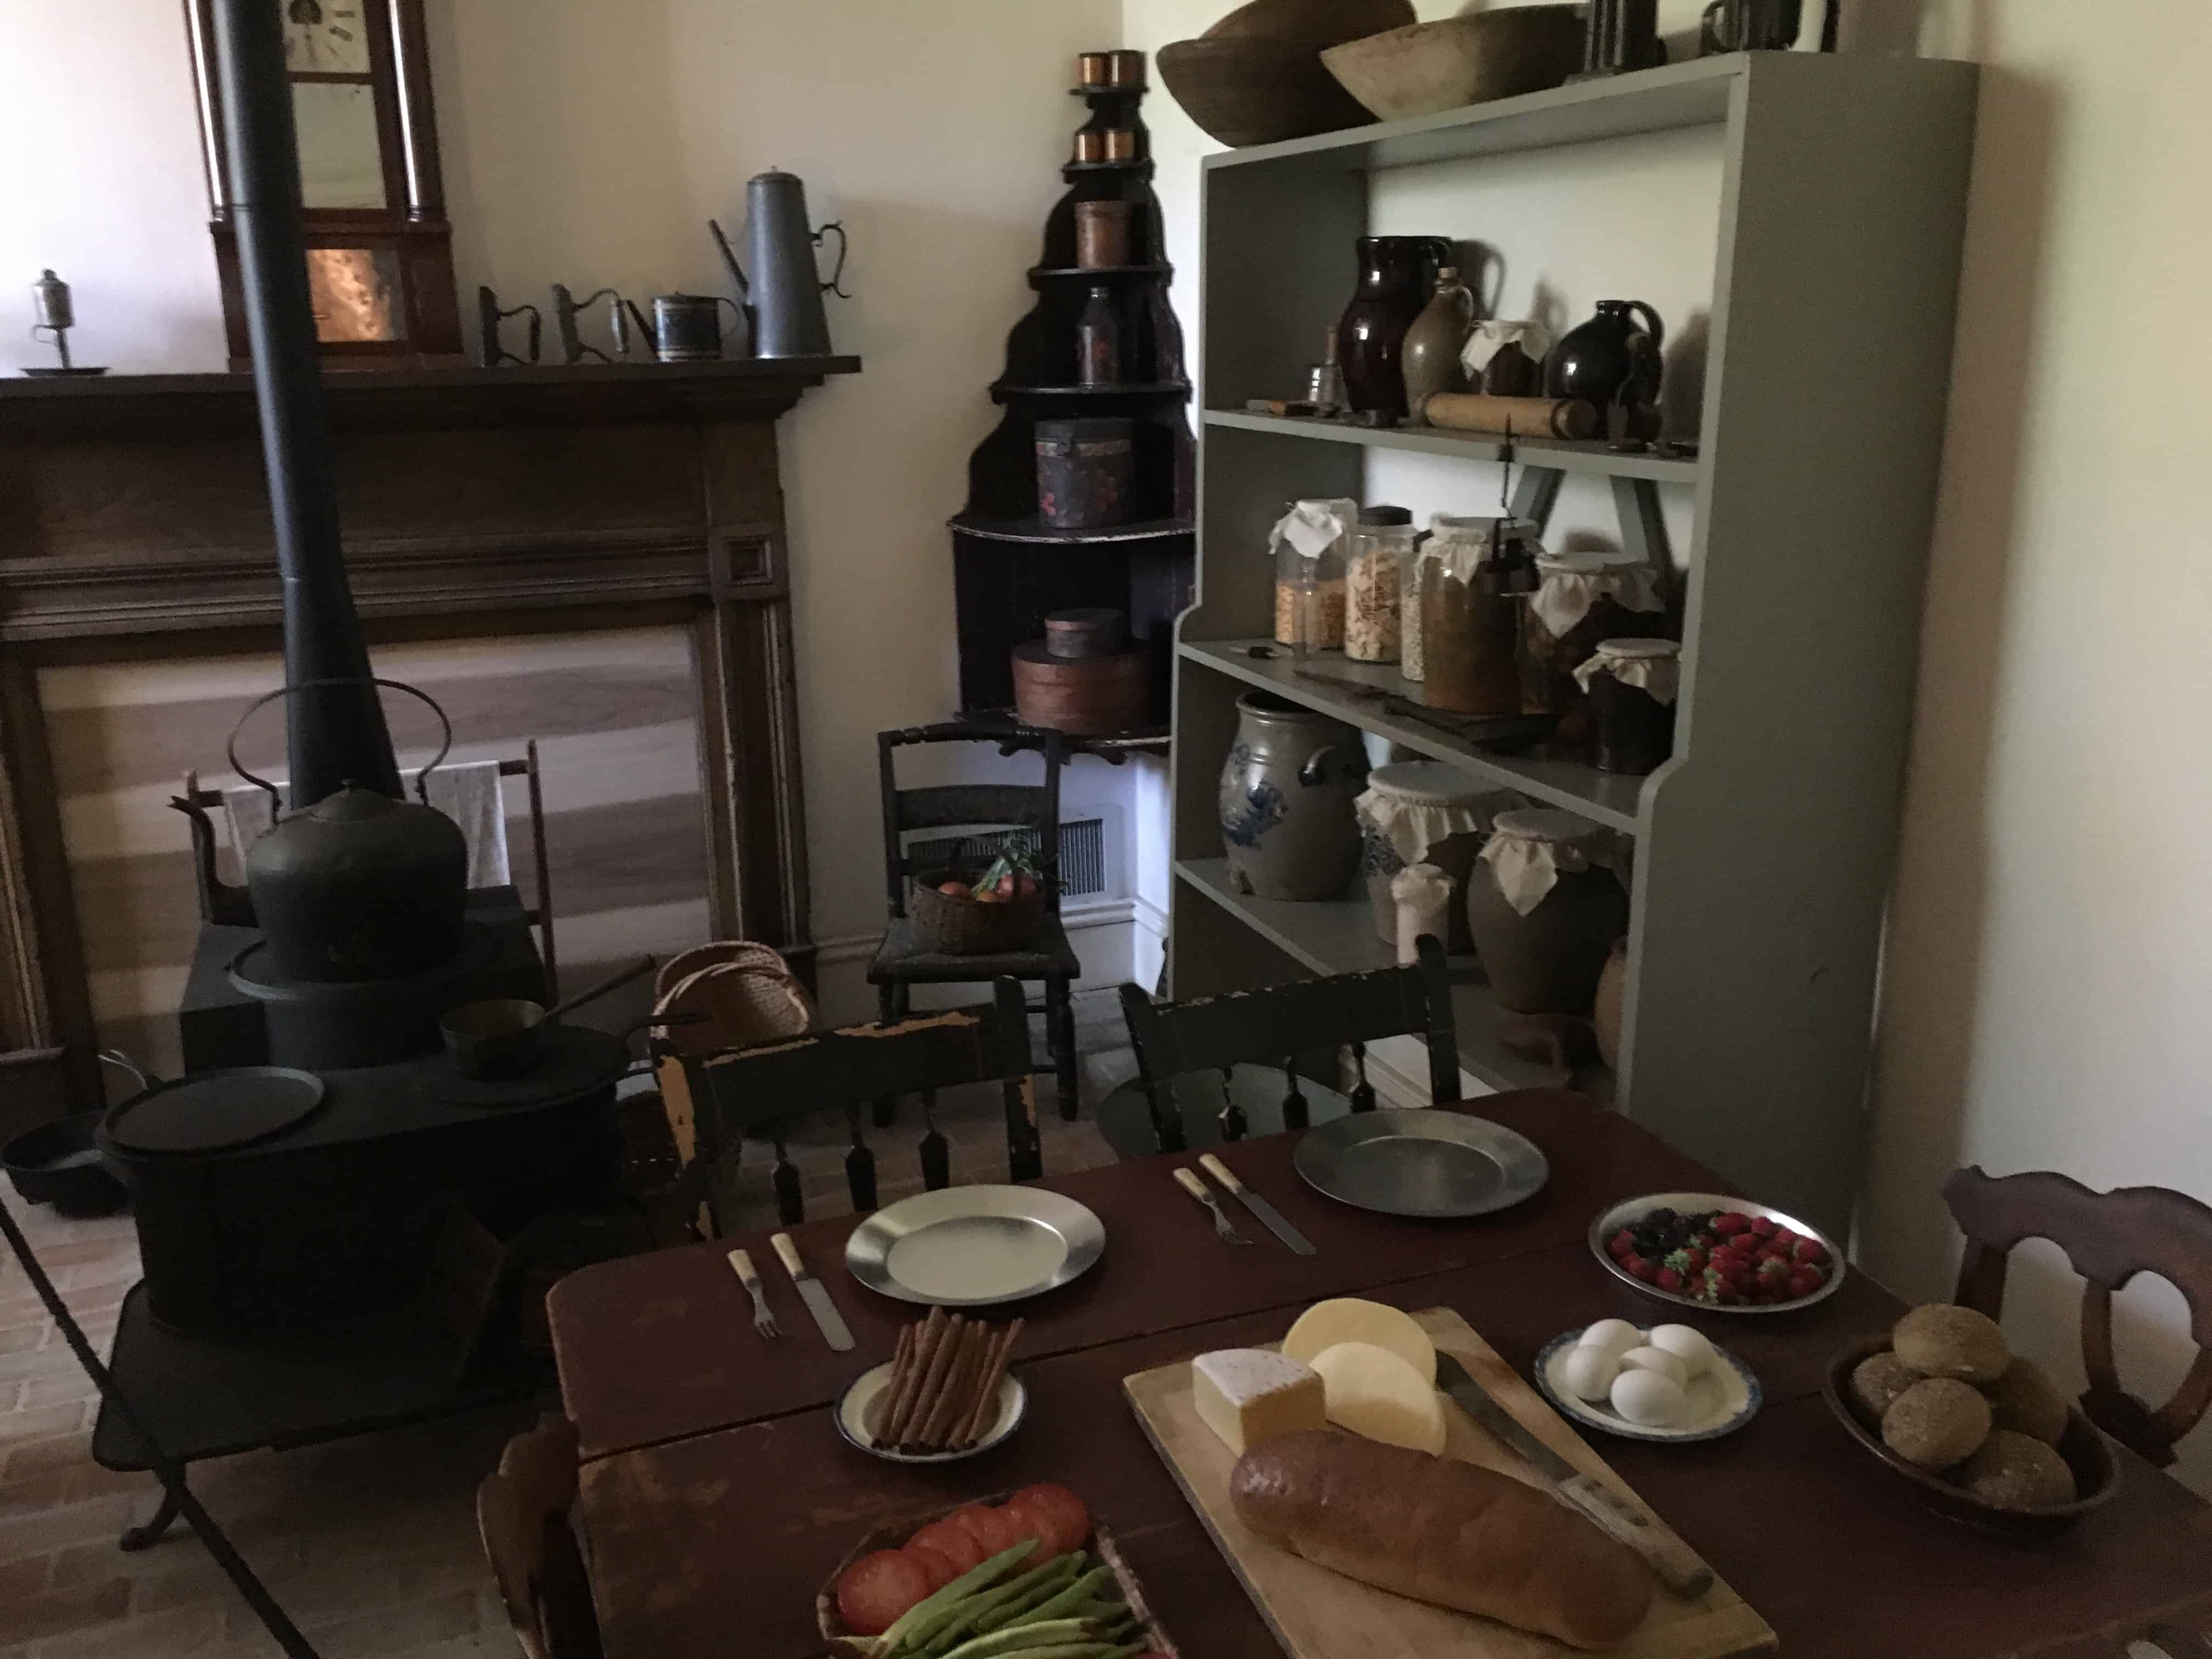 Kitchen at the Henry B. Clarke House in Chicago, Illinois